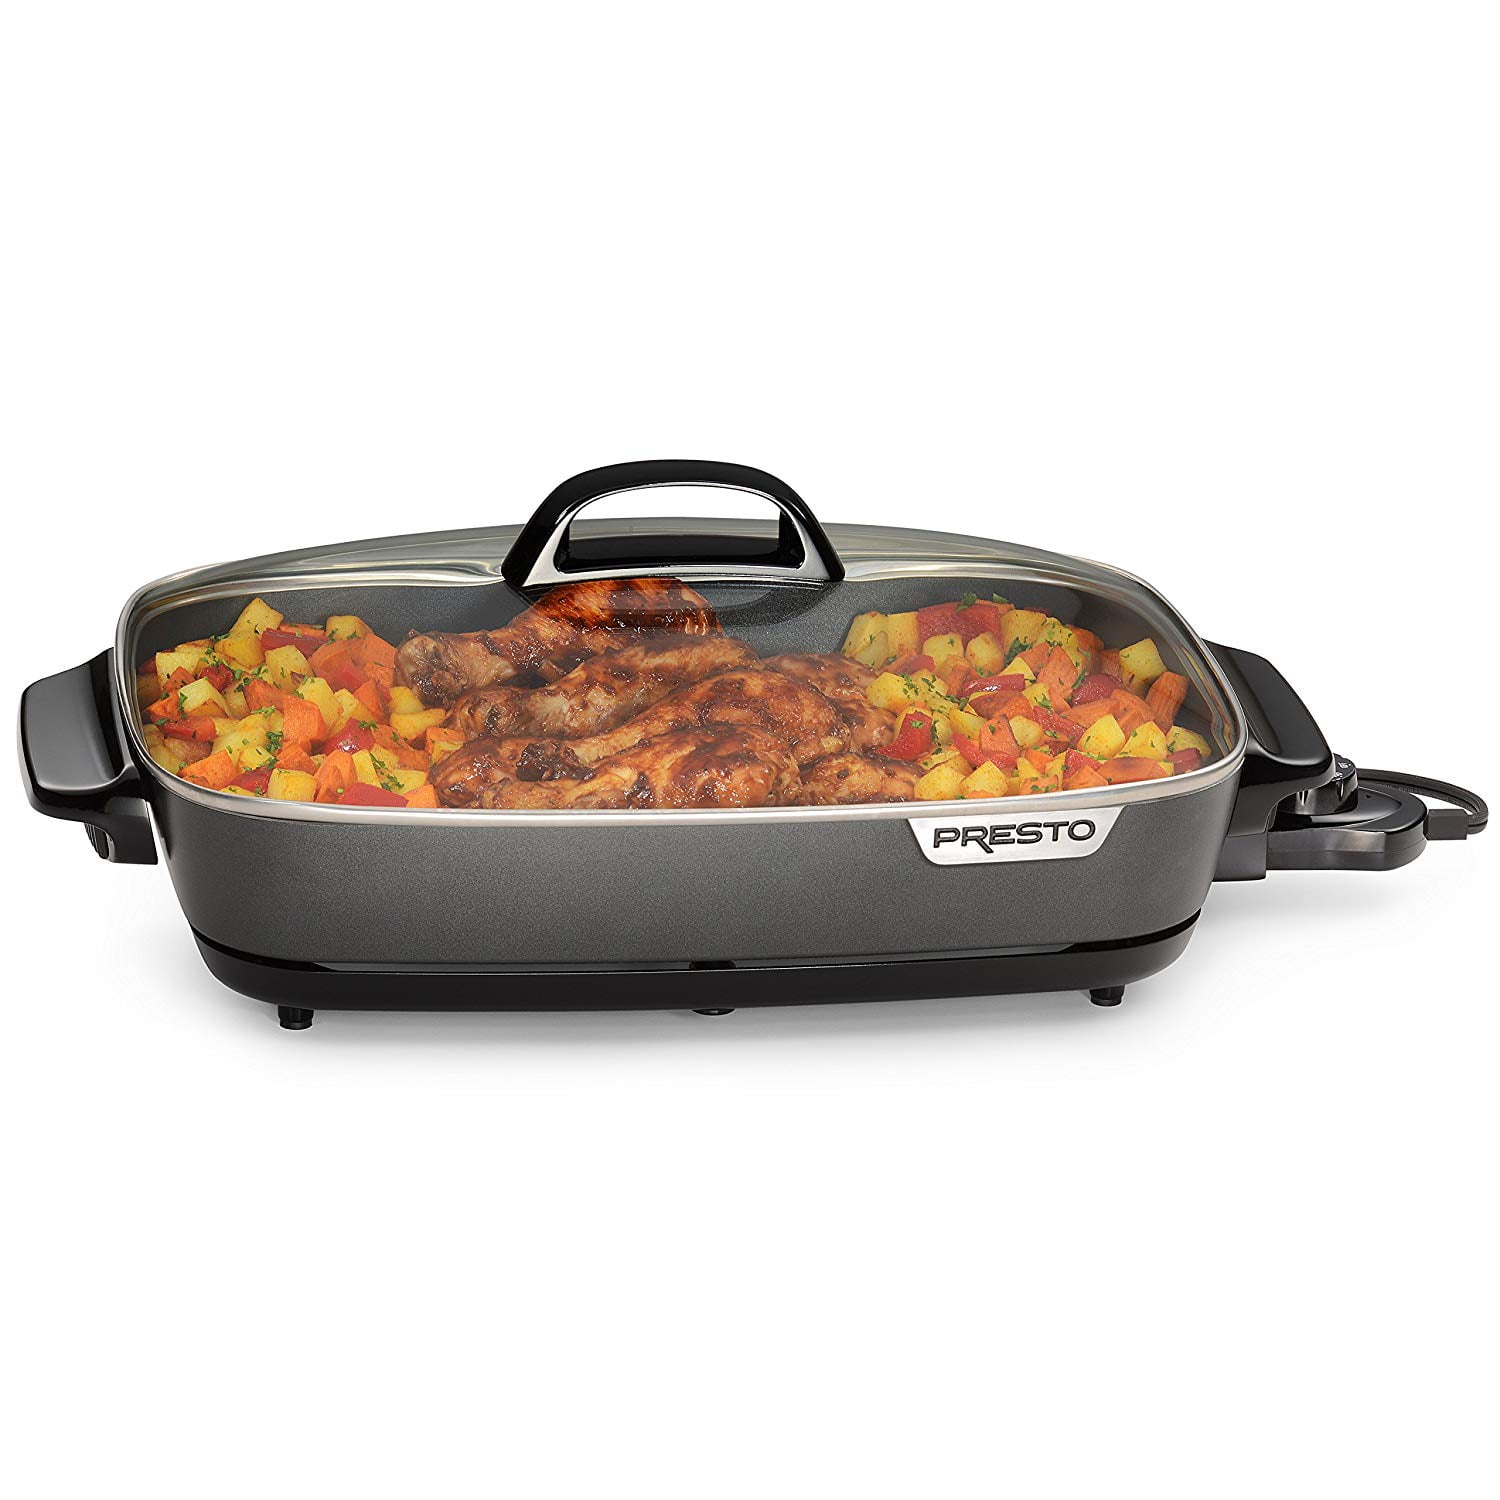 Presto 06852 16-Inch Electric Skillet with Glass Cover 